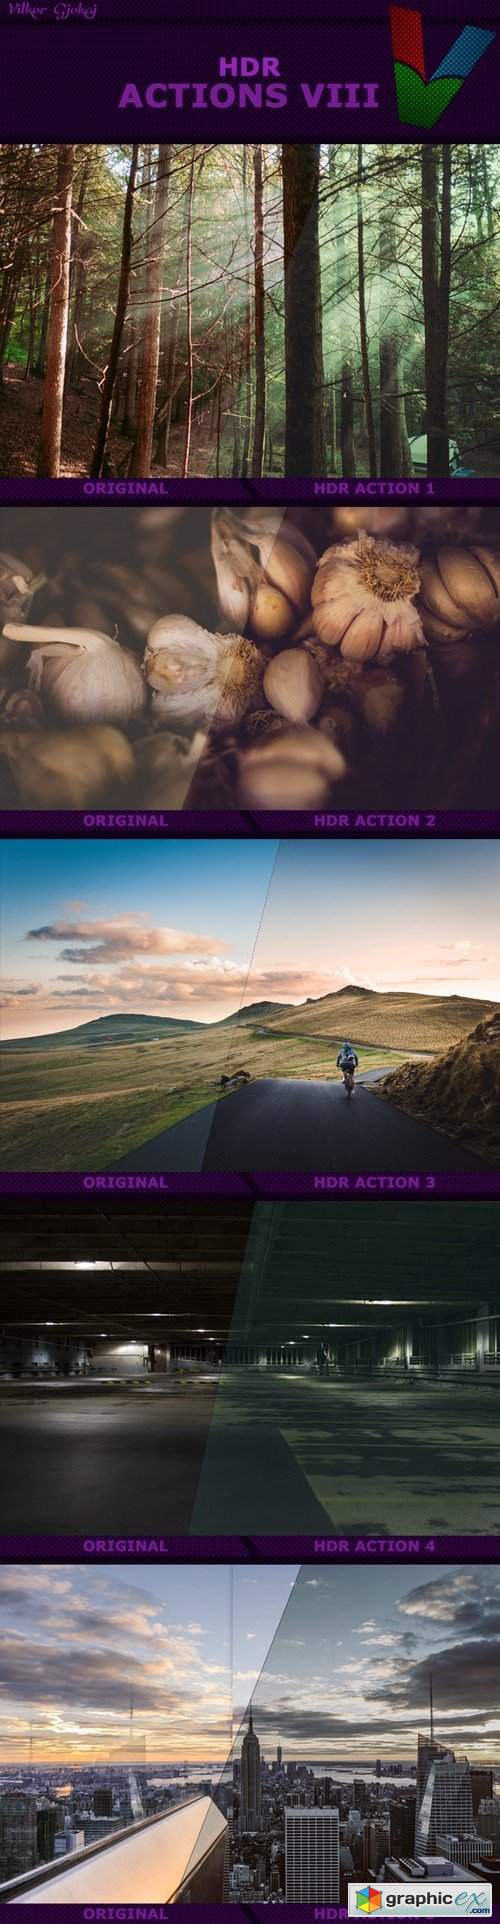 HDR Actions VIII